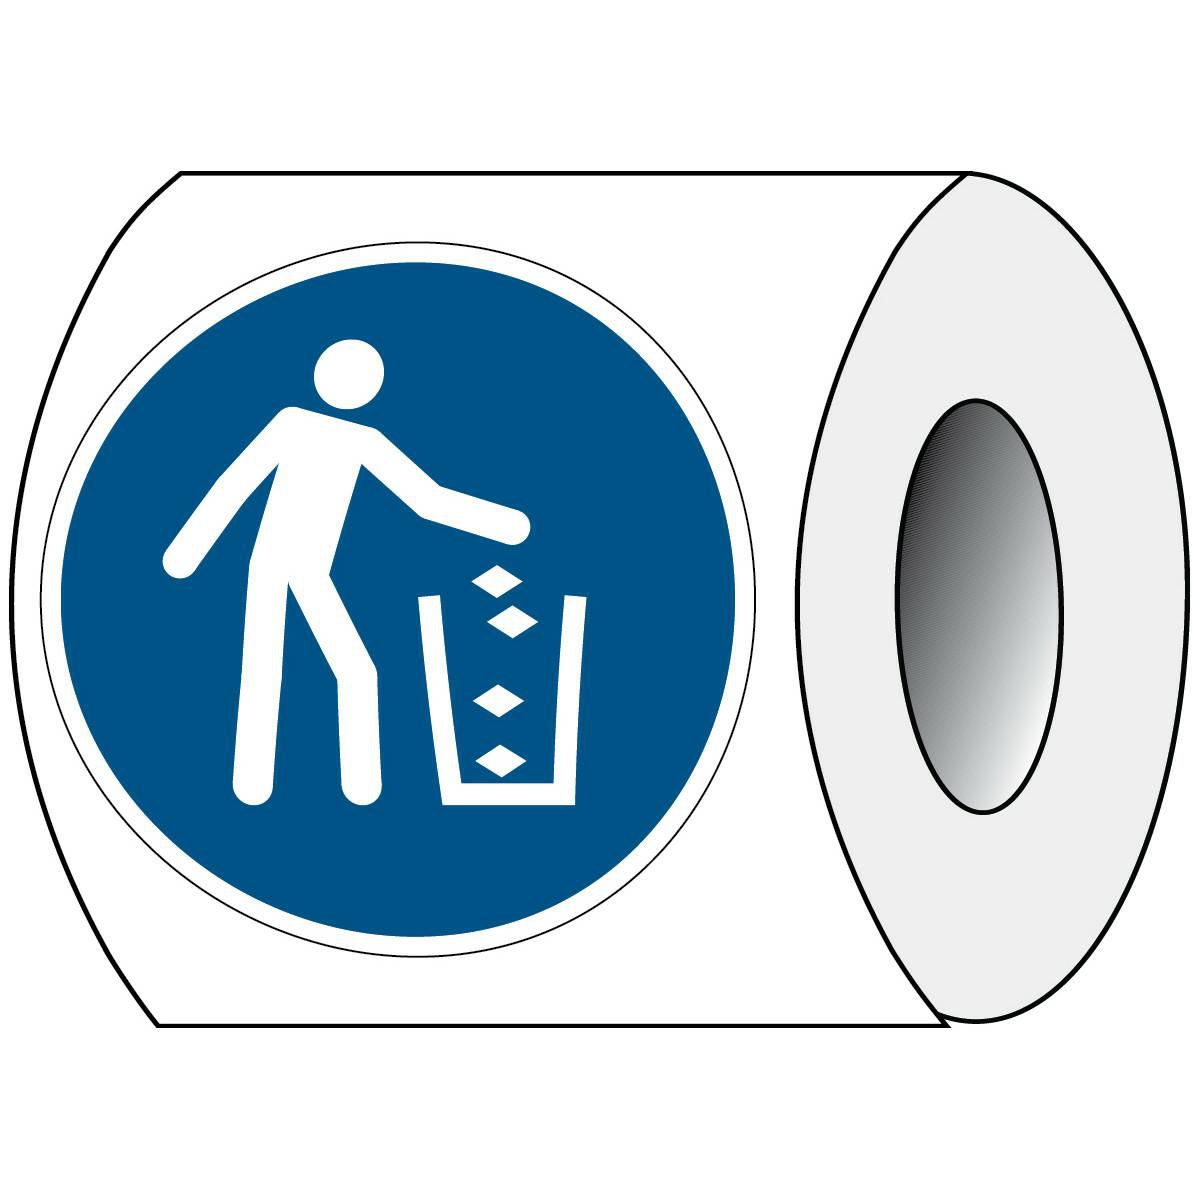 Brady PIC M030-DIA 025-PE-ROLL1 W128418418 ISO Safety Sign - Use litter 